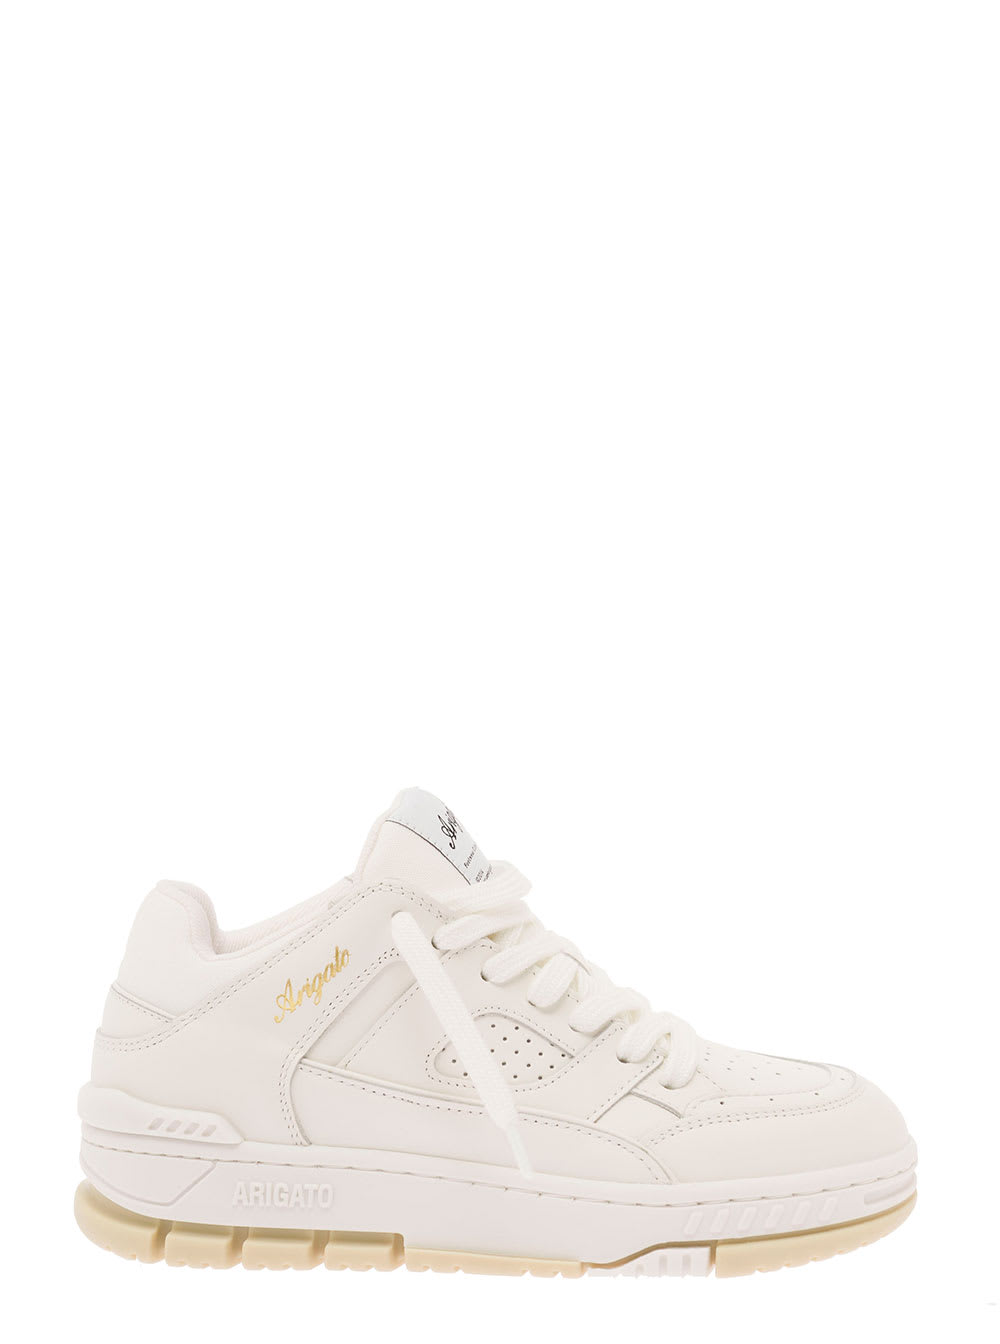 AXEL ARIGATO AREA LO WHITE SNEAKERS WITH EMBOSSED LOGO IN LEATHER BLEND WOMAN